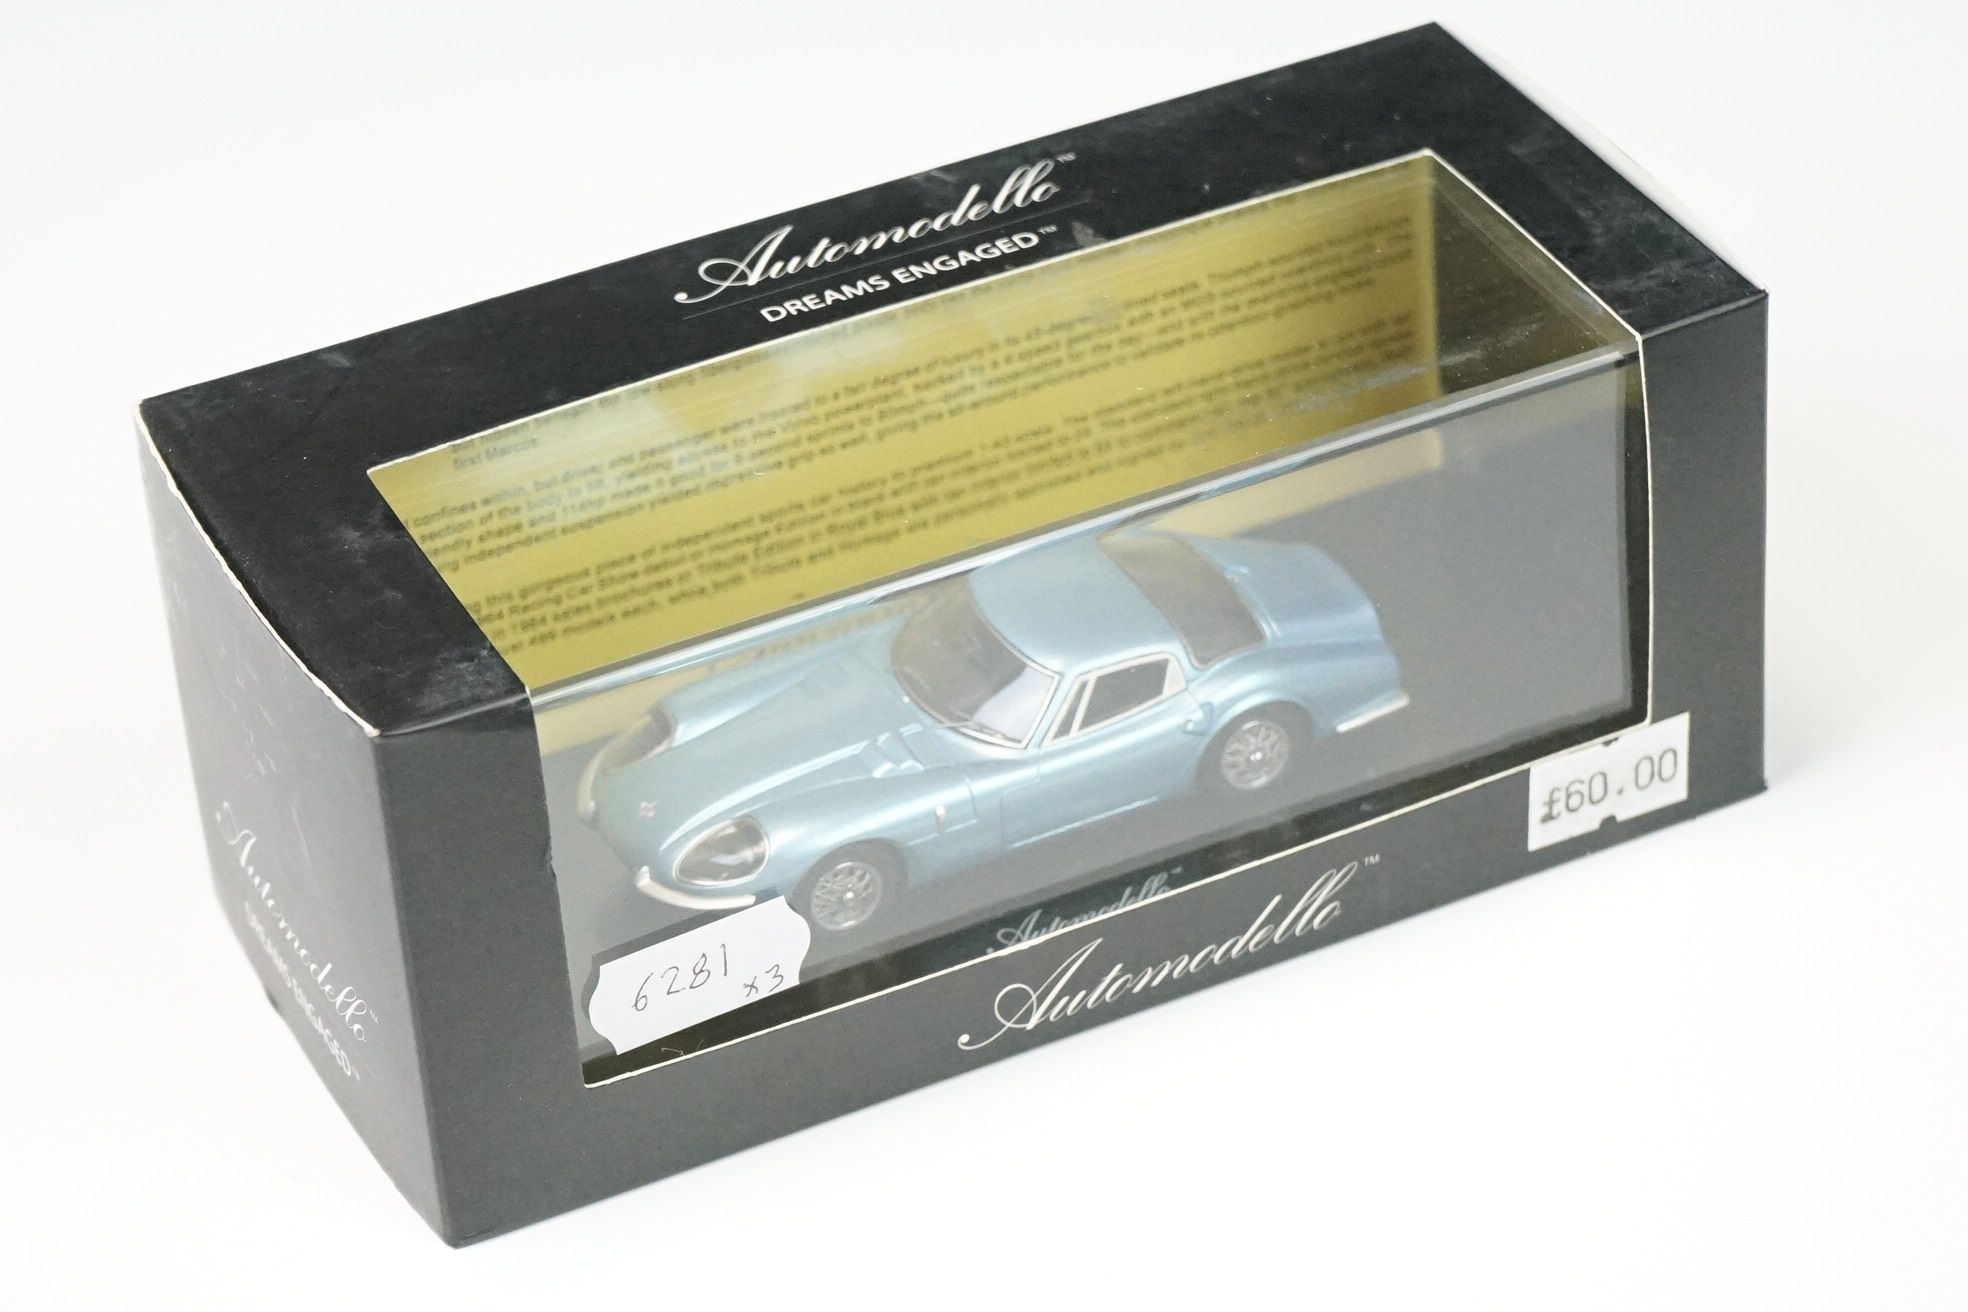 Three Boxed Automodello 1:43 1964 Marcos 1800 ltd edn models to include Tribute Edition Royal Blue - Image 6 of 7